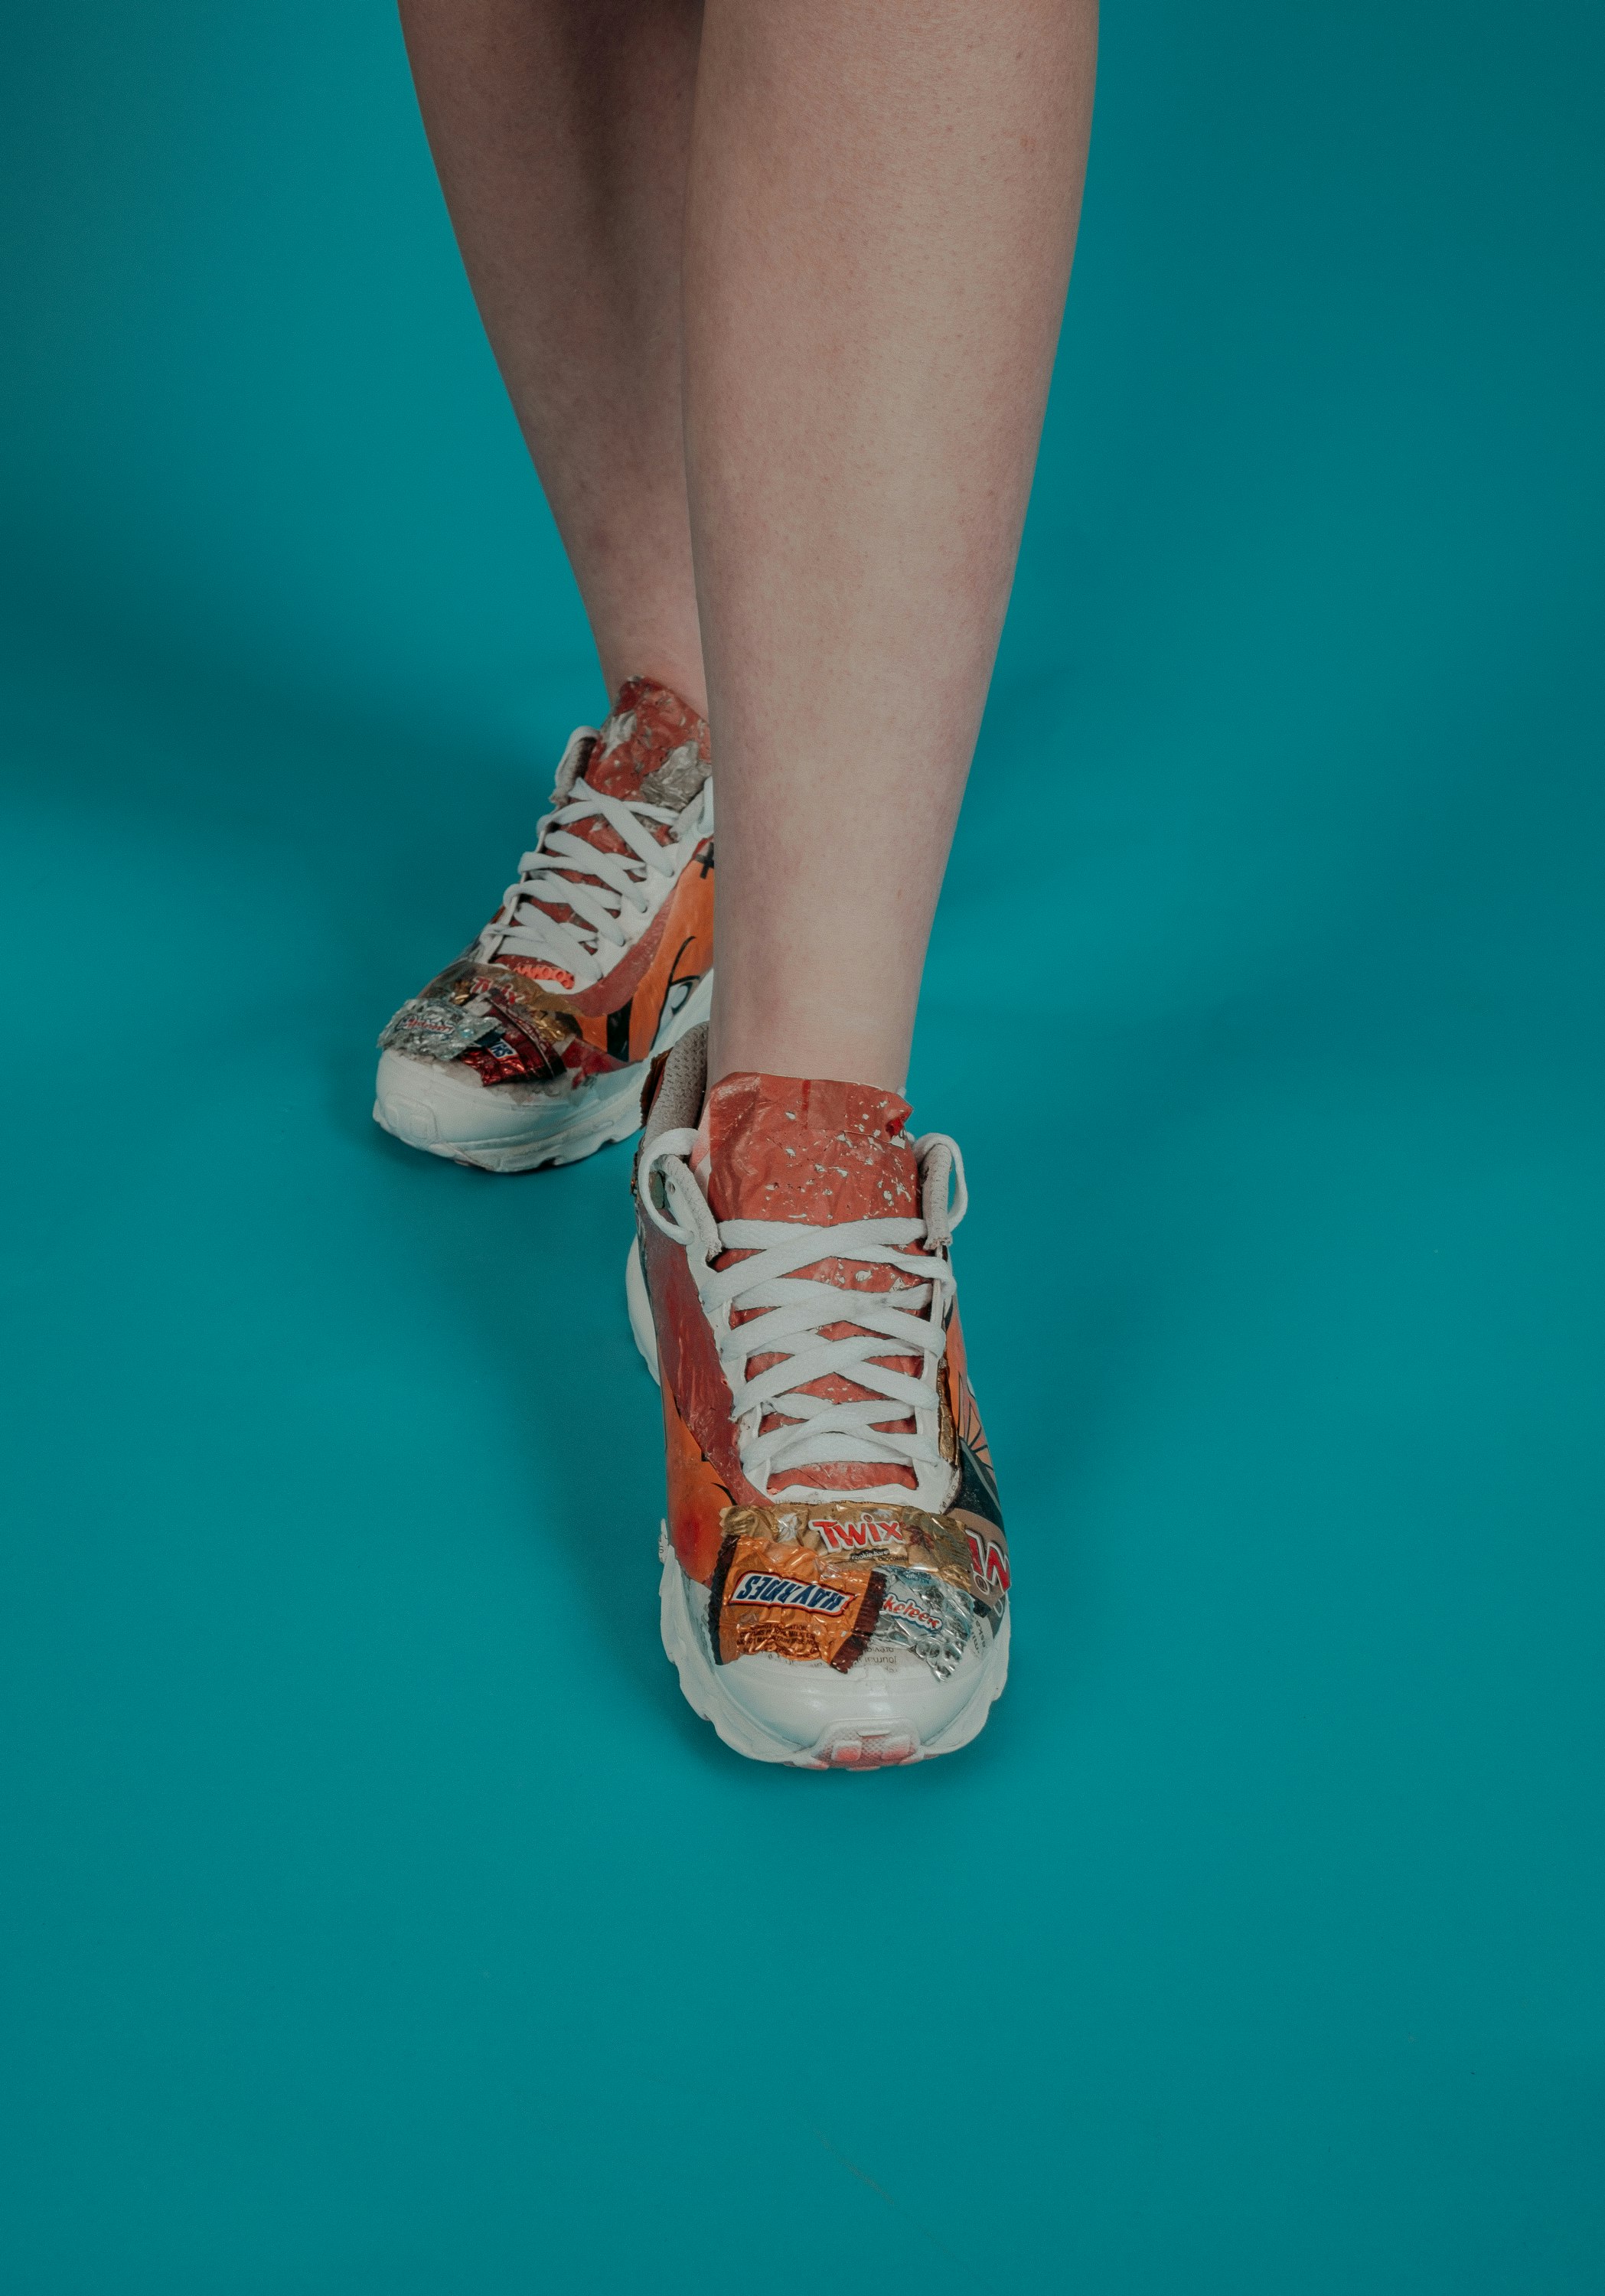 orange-and-white low-top sneakers